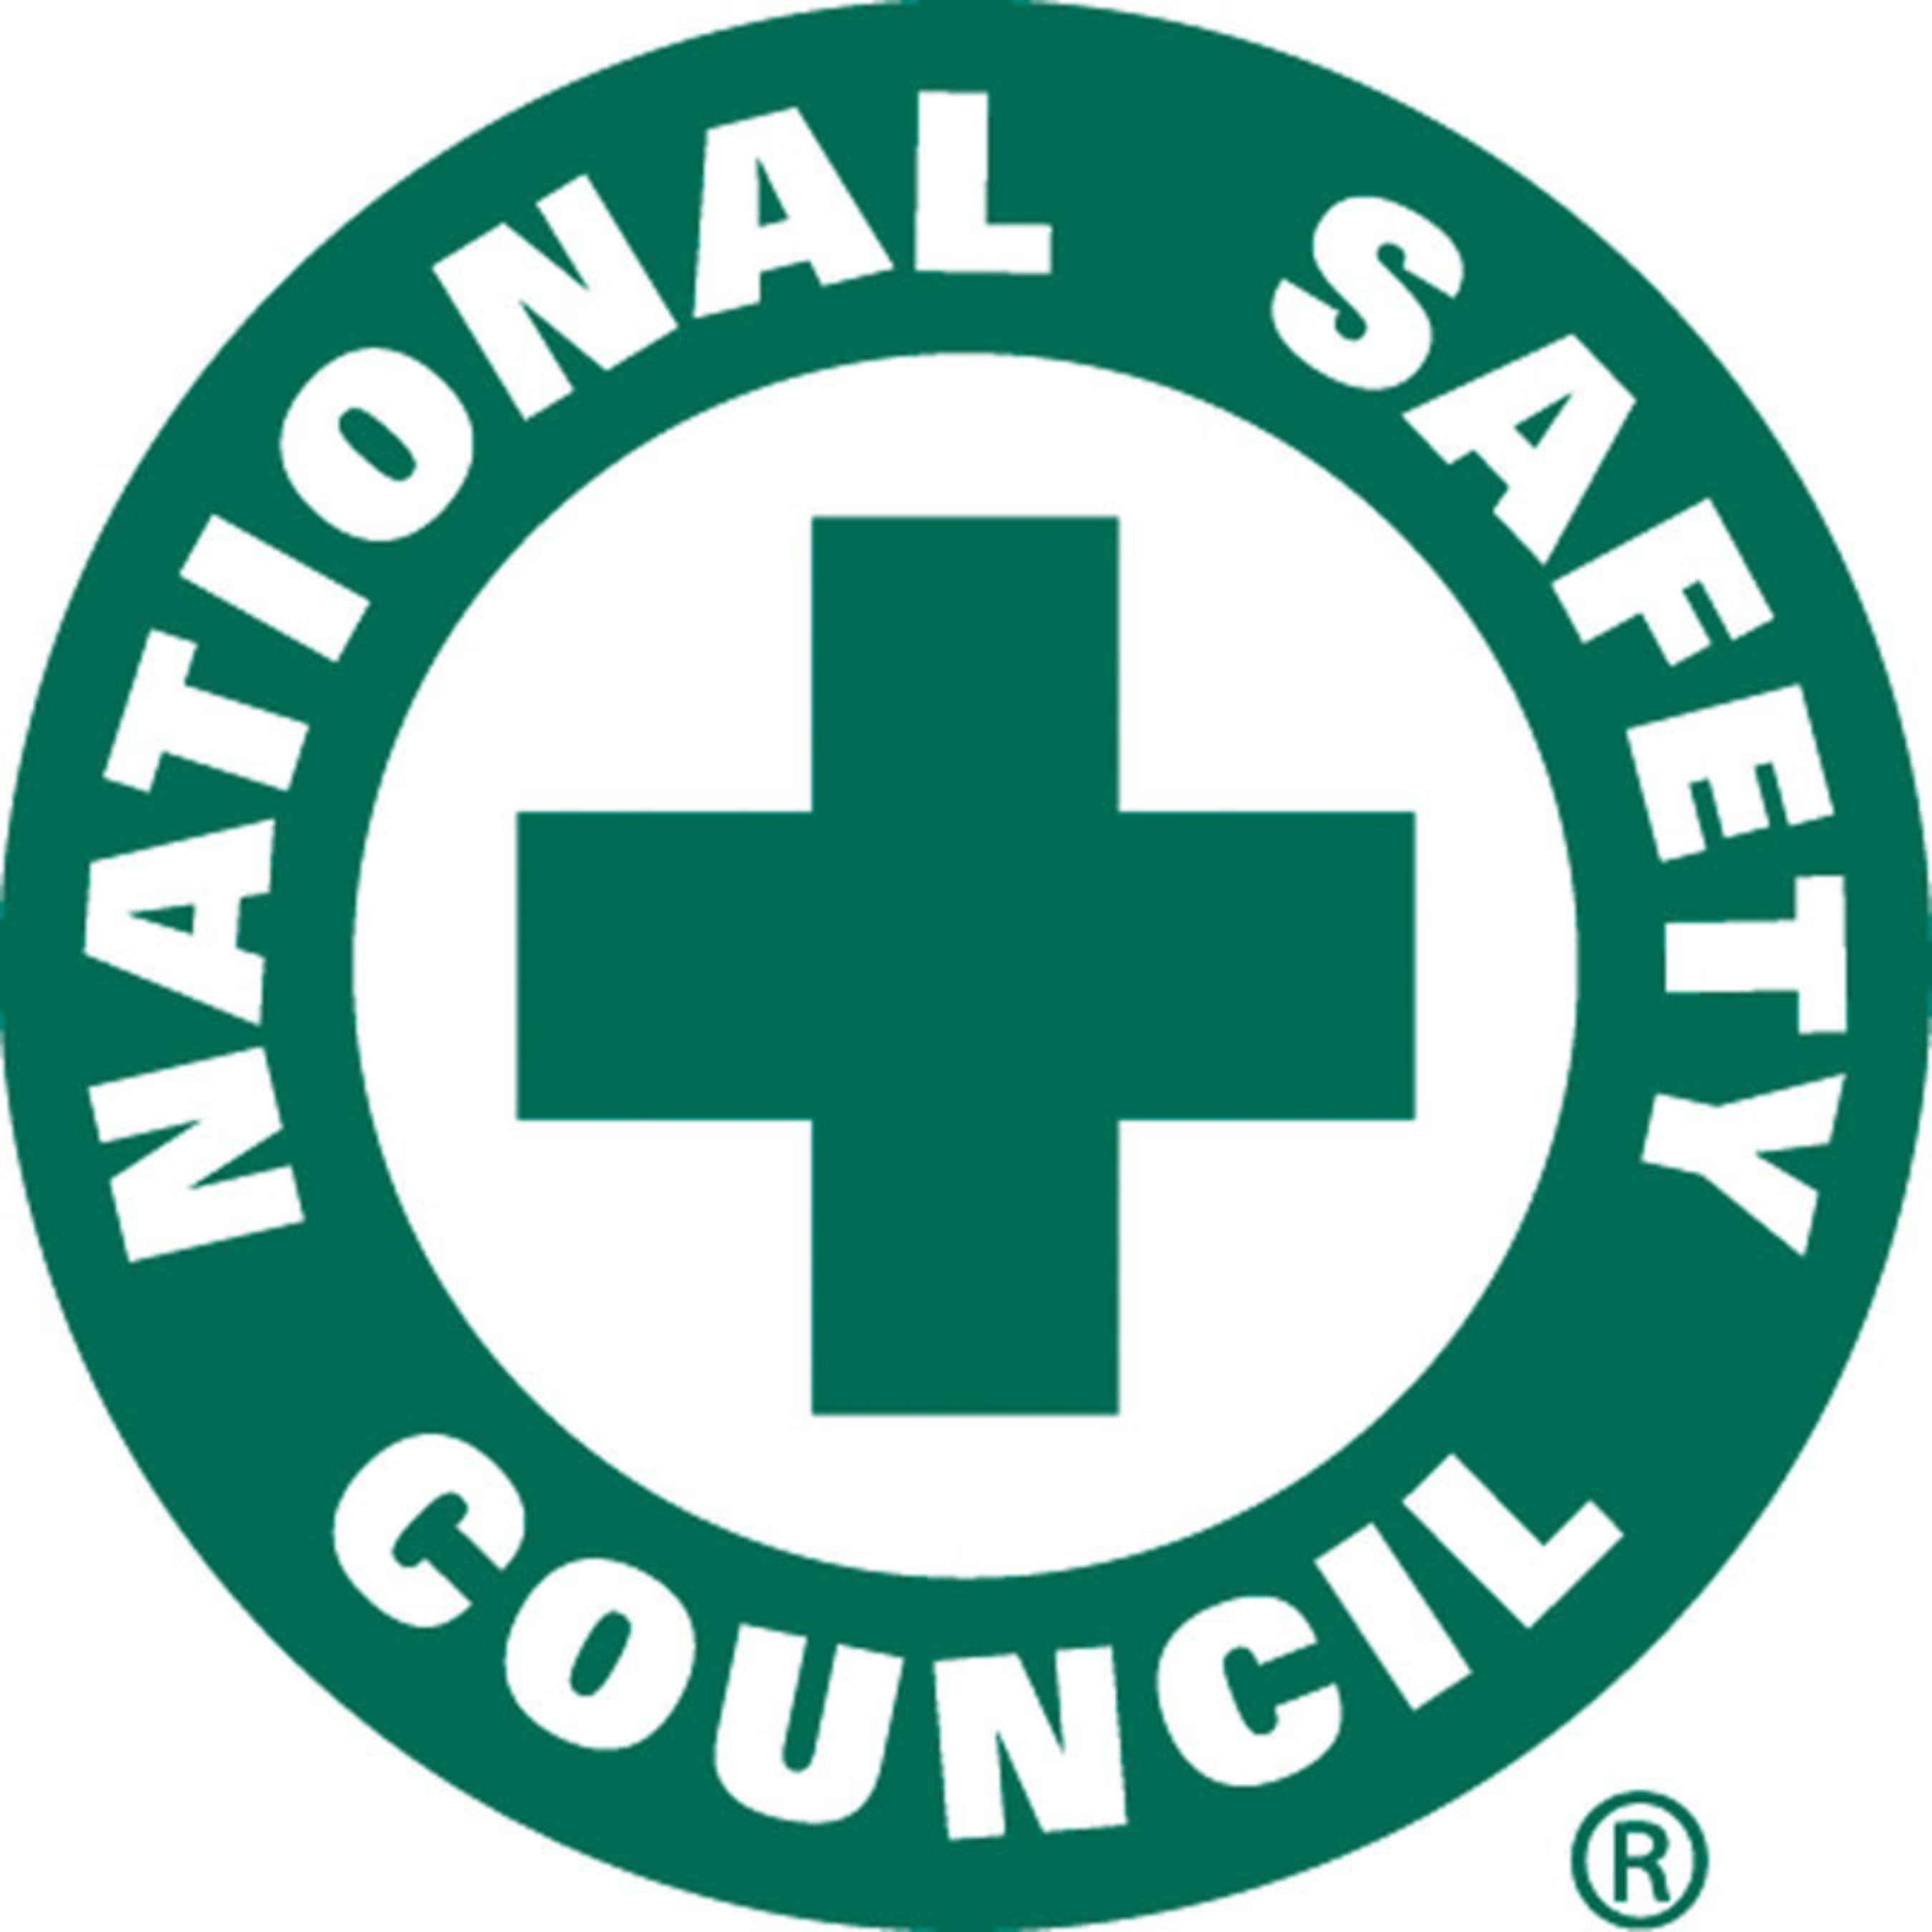 The mission of the National Safety Council is to save lives by preventing injuries and deaths at work, in homes and communities and on the road through leadership, research, education and advocacy. (PRNewsFoto/National Safety Council)